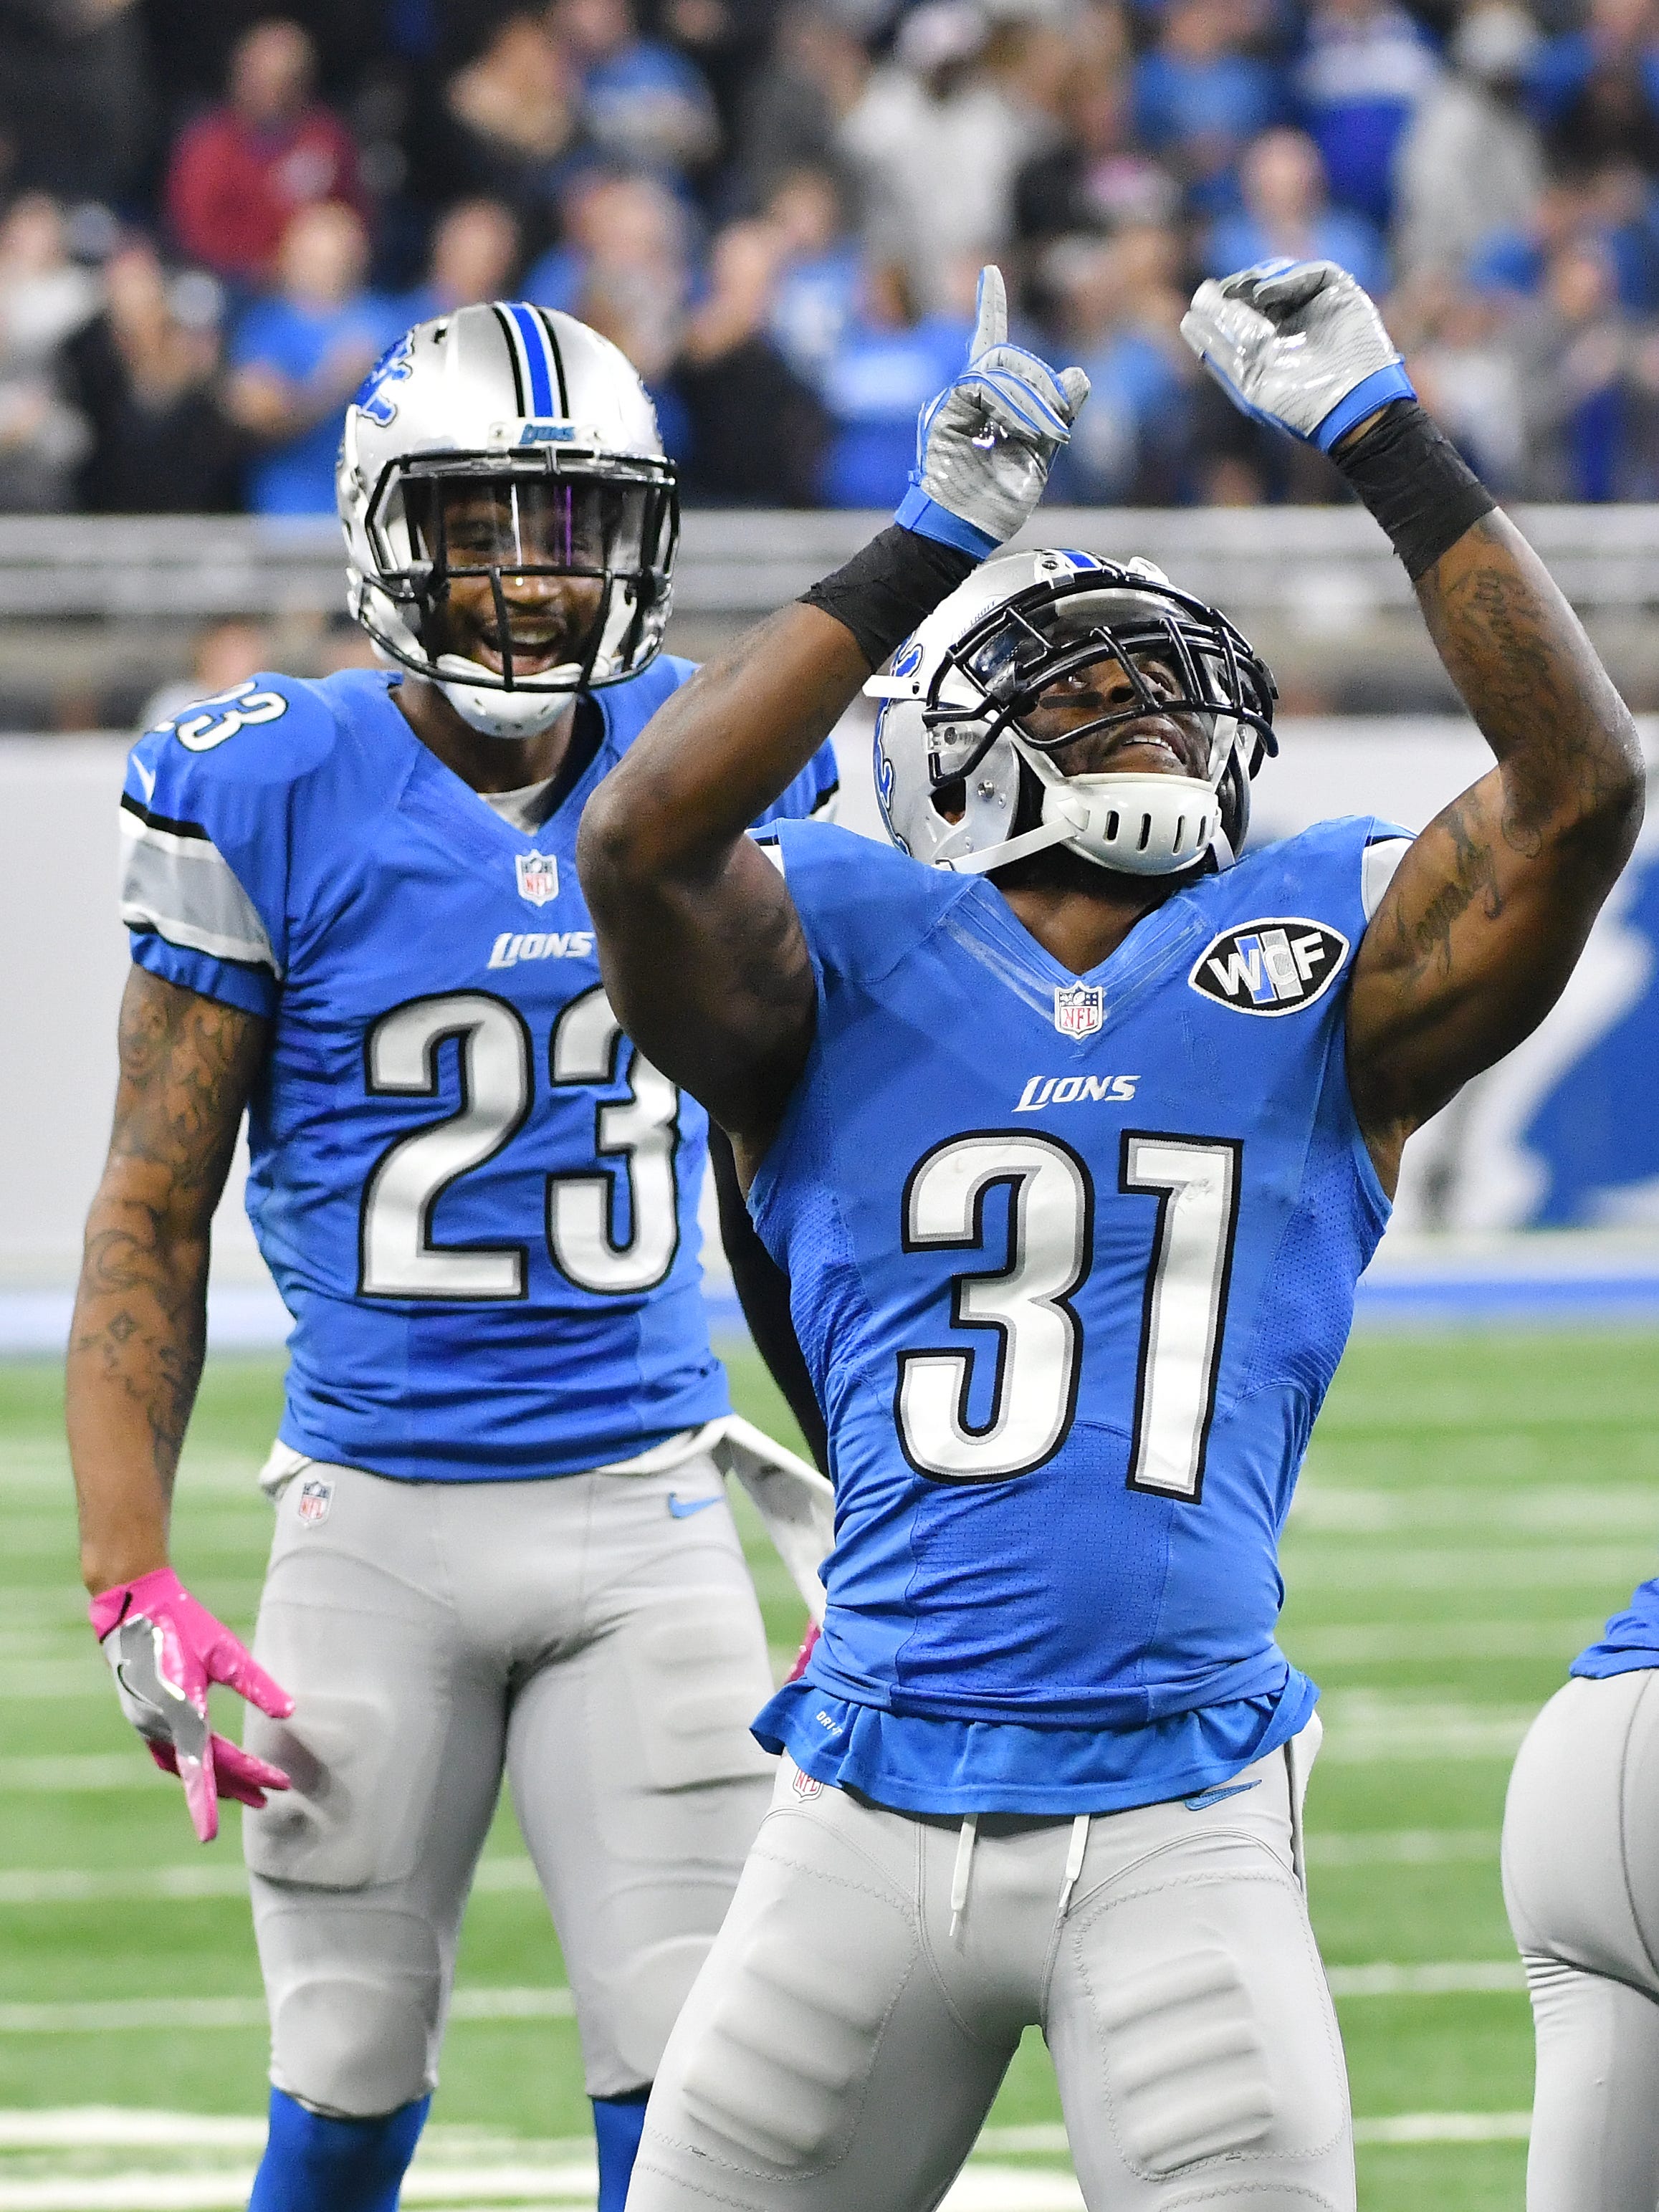 Lions safety Rafael Bush points skyward after his late fourth quarter interception to seal Detroit's victory.